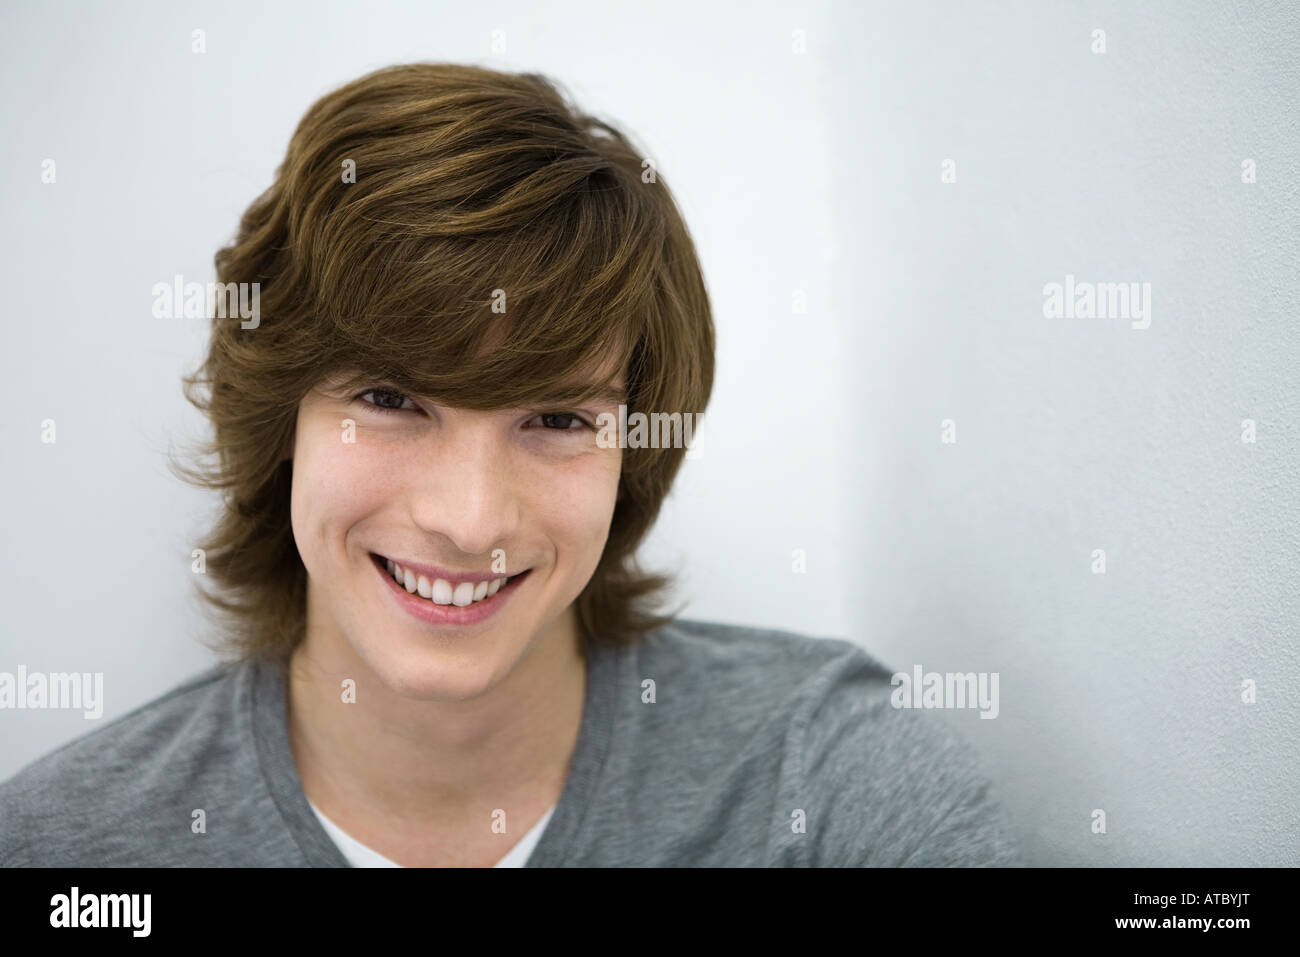 Young man smiling at camera, close-up, portrait Stock Photo